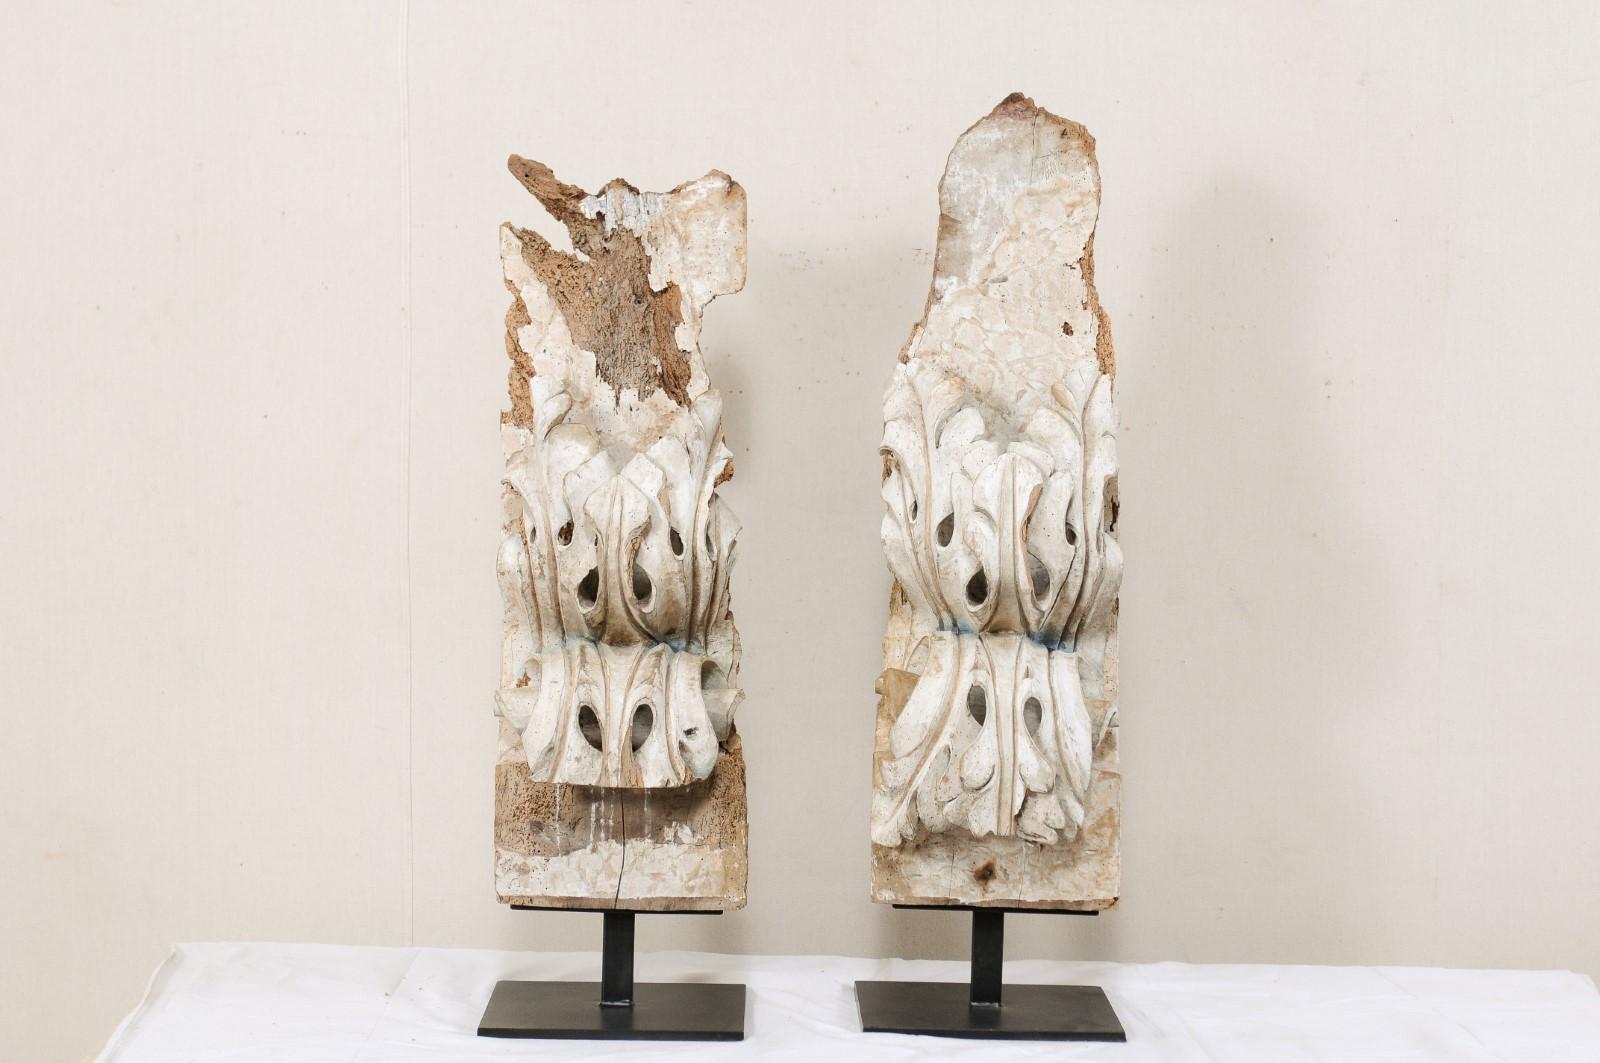 A pair of Italian carved-wood fragments from the 18th century, mounted on custom stands. These antique wooden fragments from Italy have been heavily hand carved in a three-dimensional scroll and acanthus leave motif. The carvings project out from